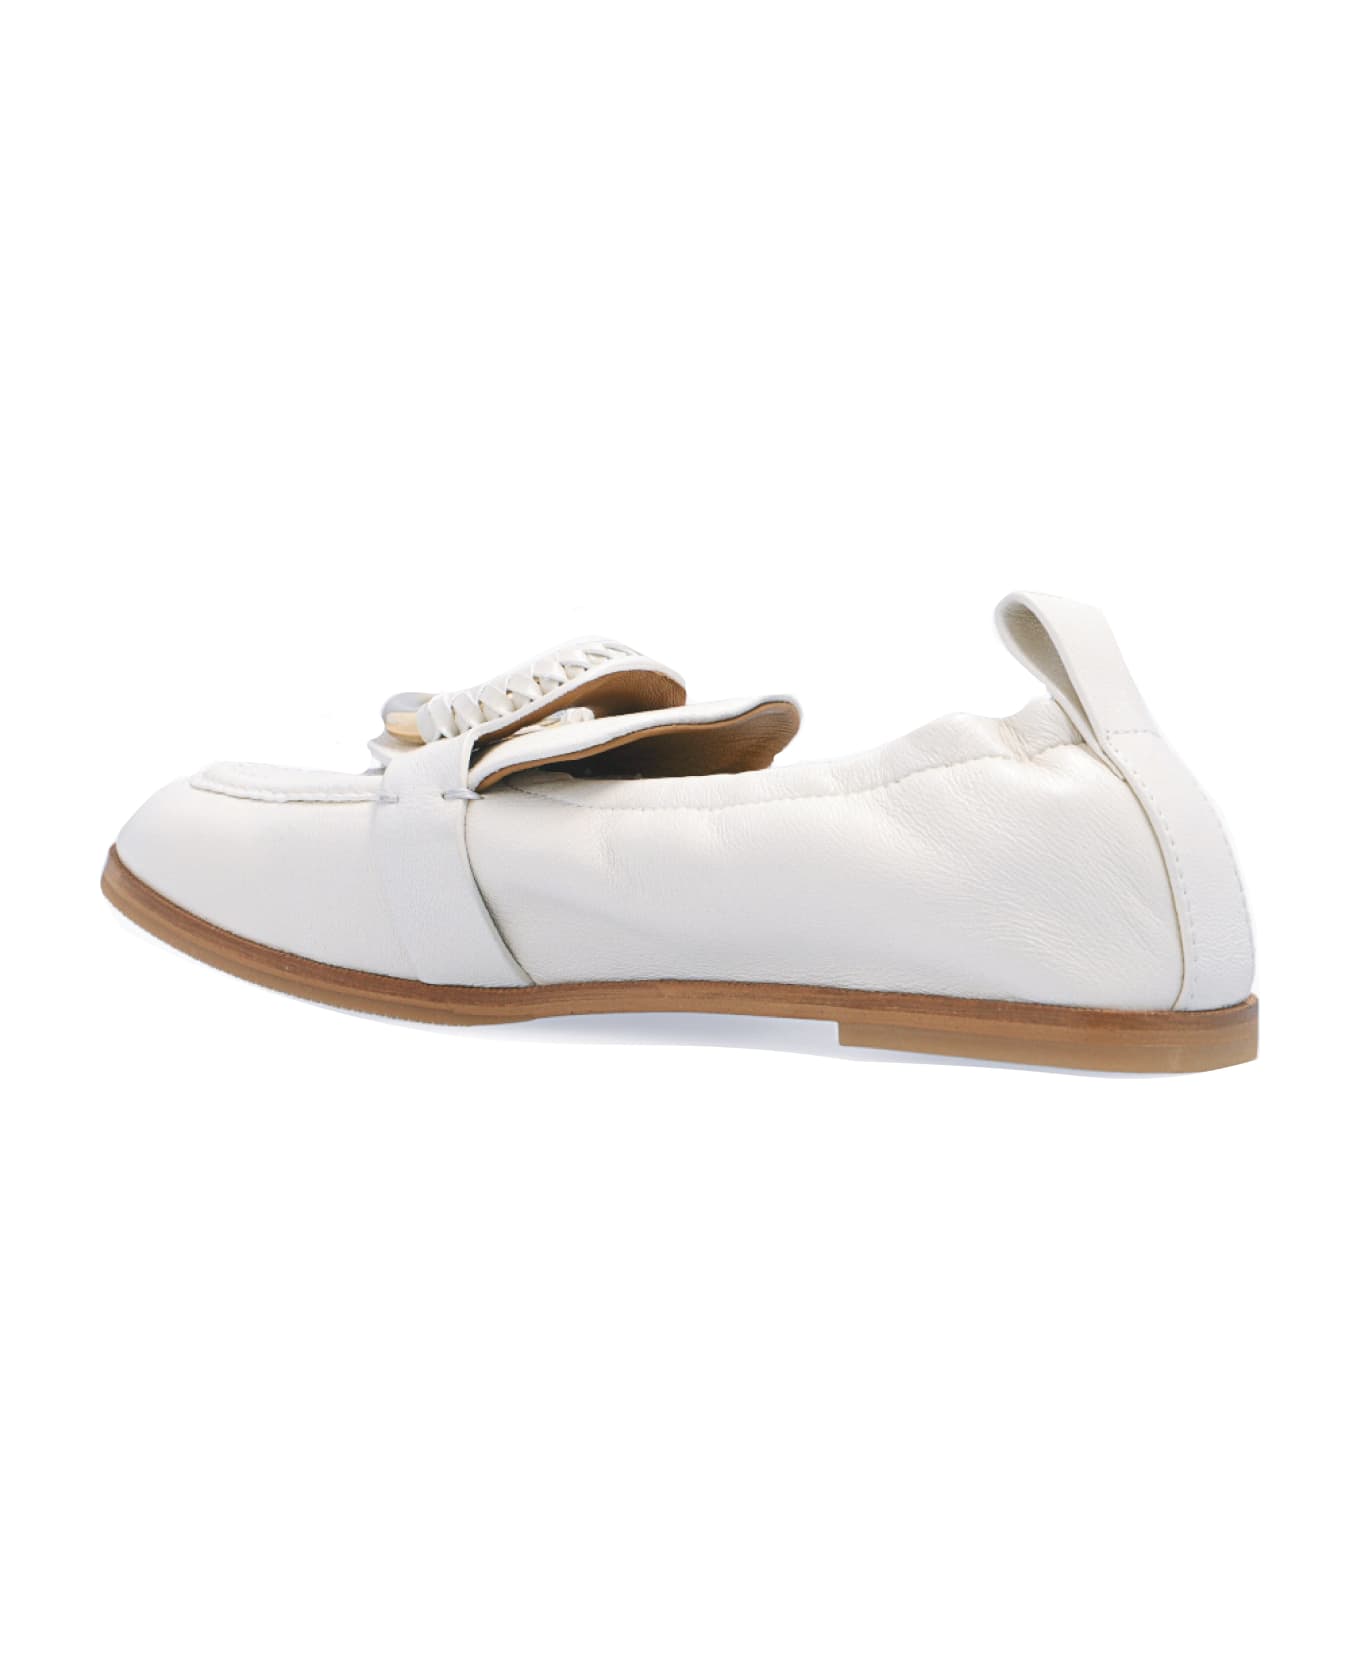 See by Chloé Hana Leather Loafers - White